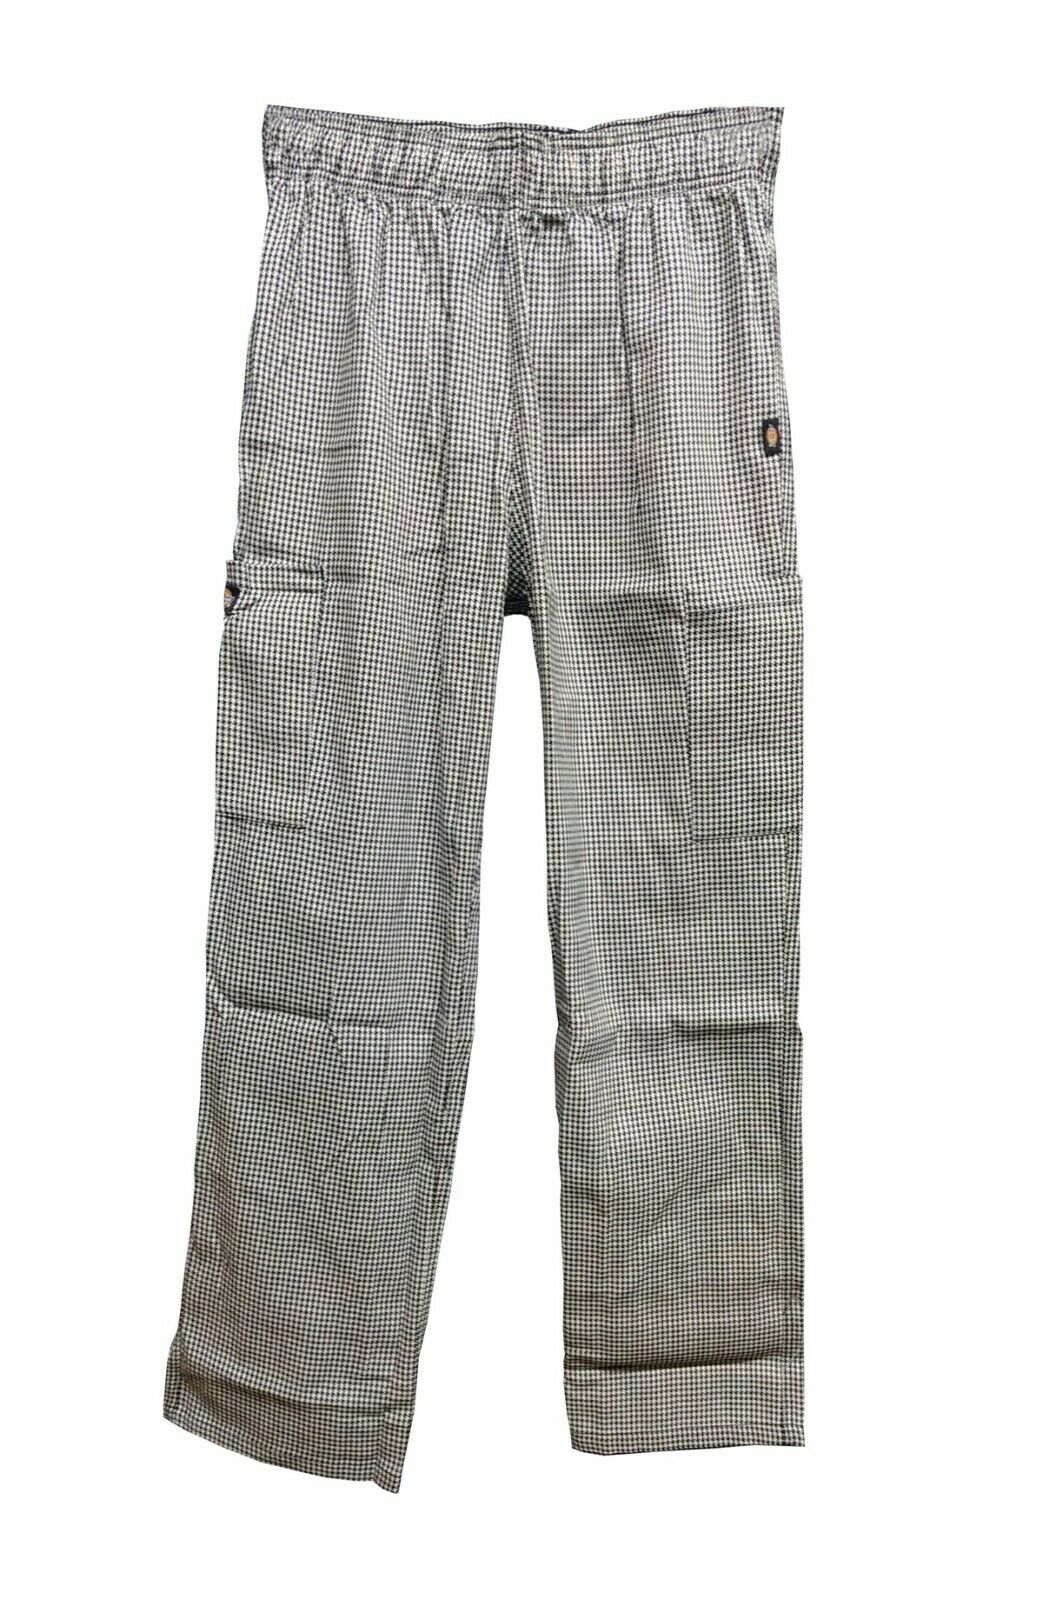 Brand New Dickies Mens Checkered Chef Pants